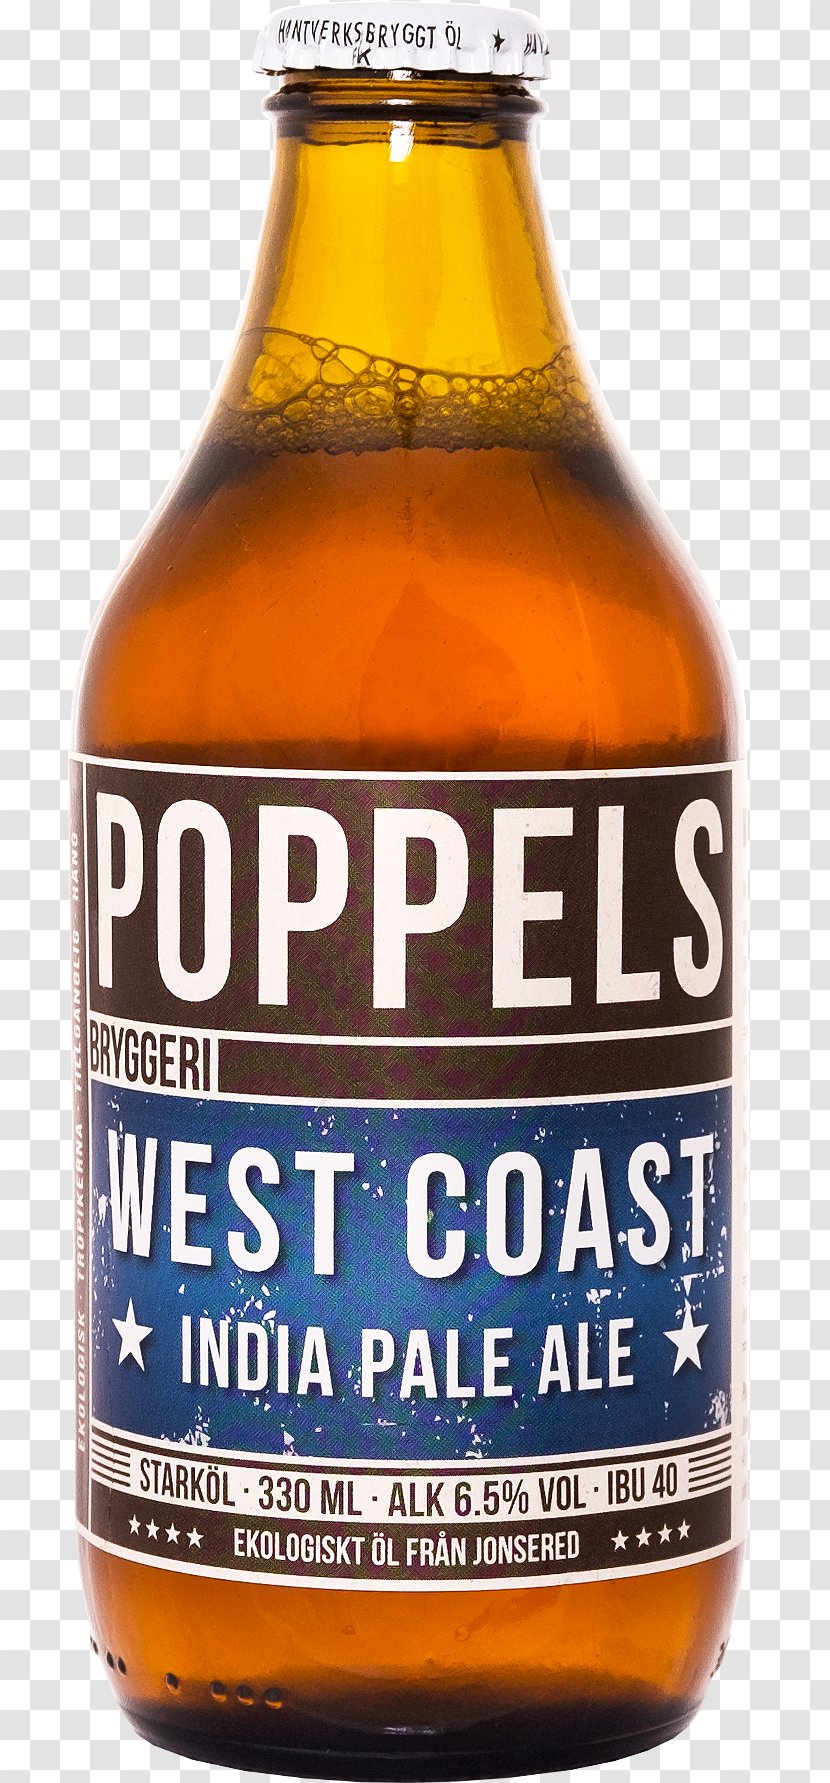 Beer Bottle India Pale Ale Russian Imperial Stout Poppels Brewery - West Coast Transparent PNG